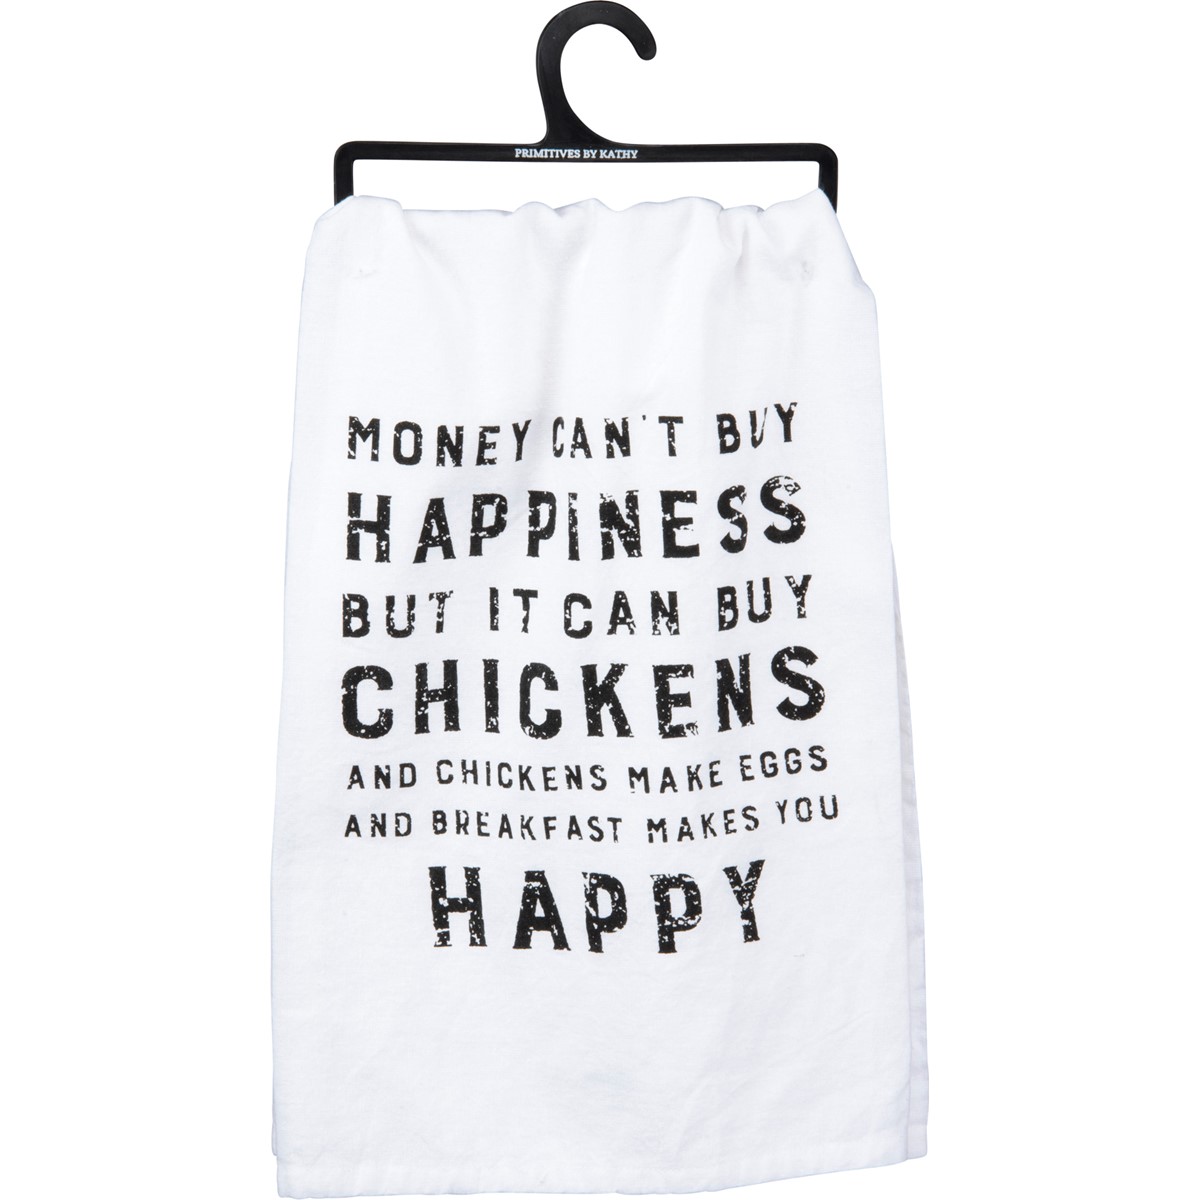 Happiness But It Can Buy Chickens Kitchen Towel - Cotton